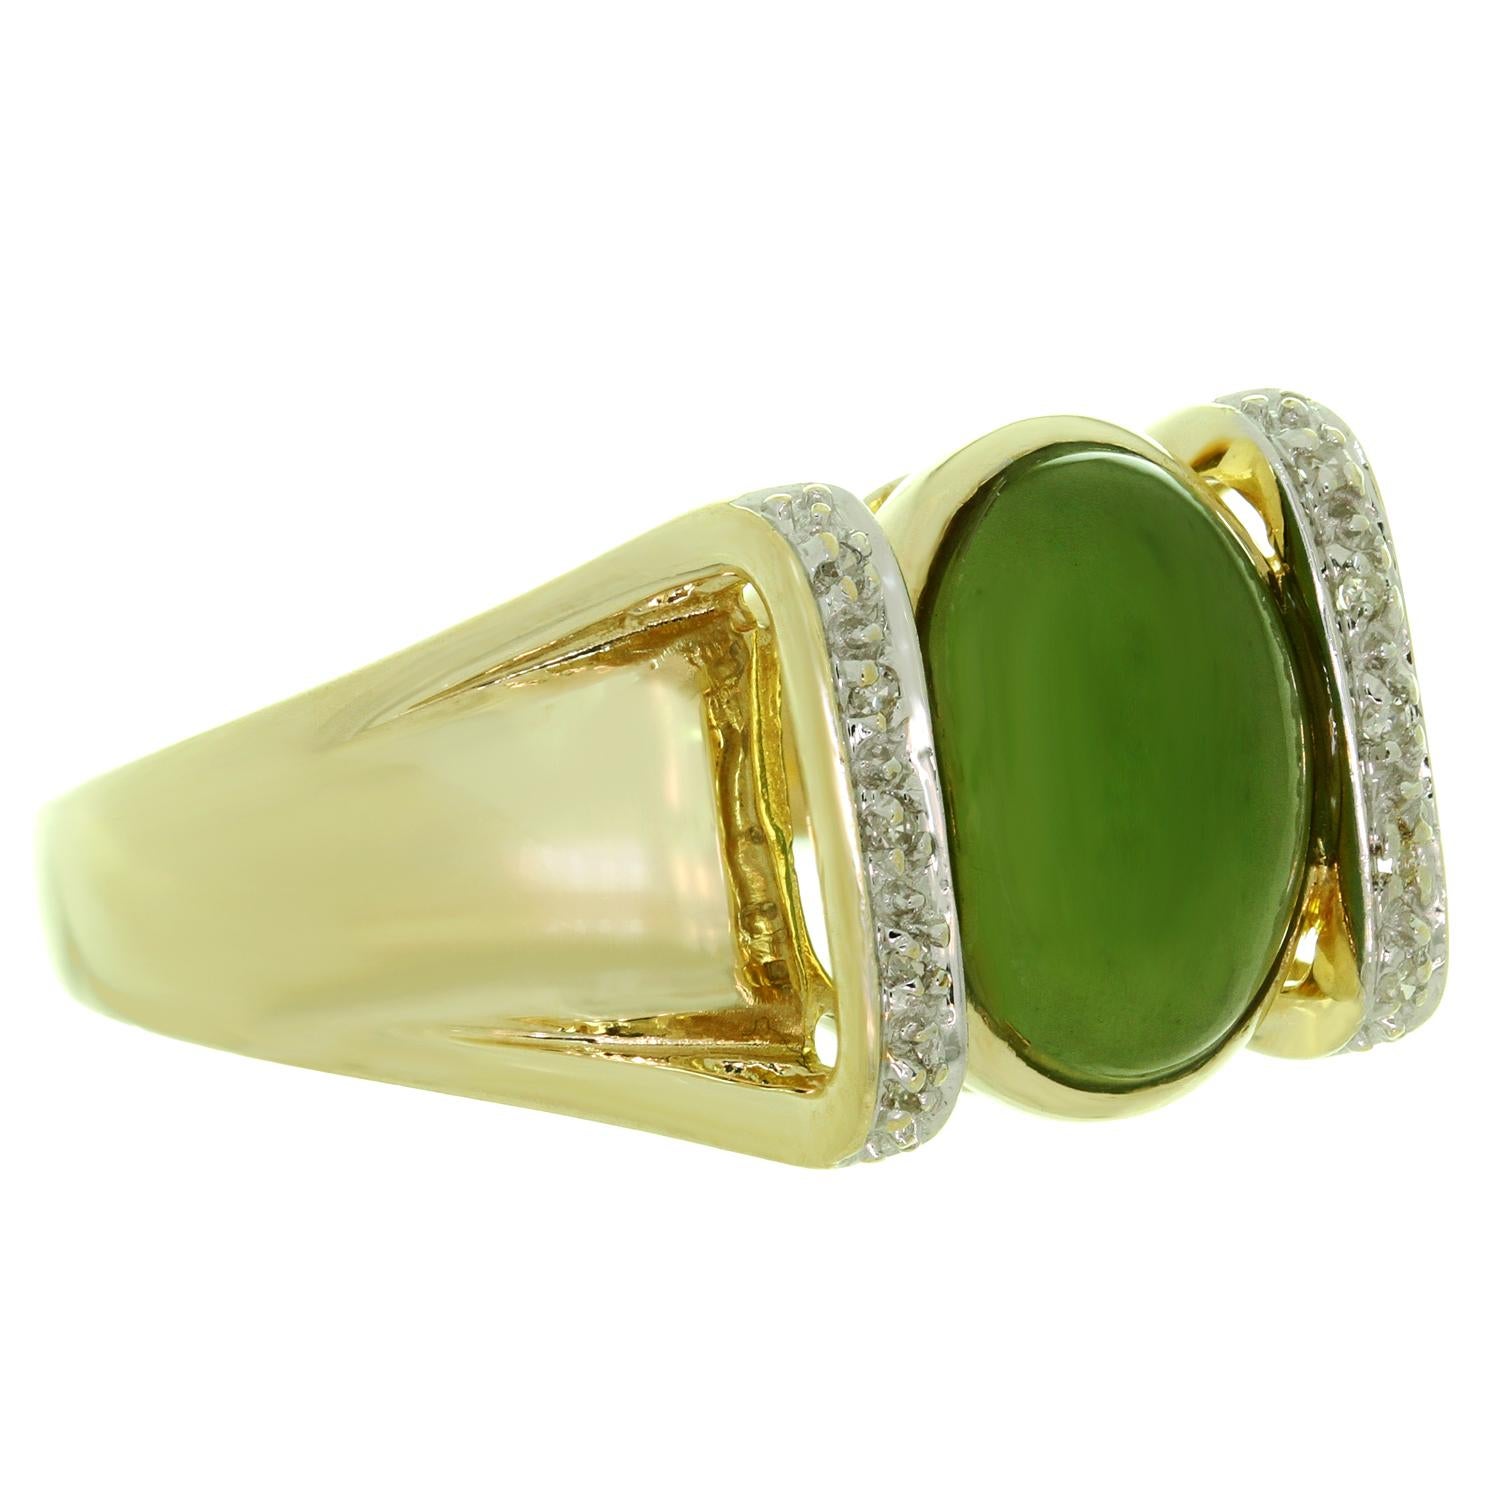 This classic estate collection cocktail ring is craftd in 14k yellow gold set with a green oval jade and surrounded with 10 single-cut round SI1-SI2 diamonds of an estimated 0.10 carats. Made in United States circa 1960s. Ring Size is 8 - EU 57.